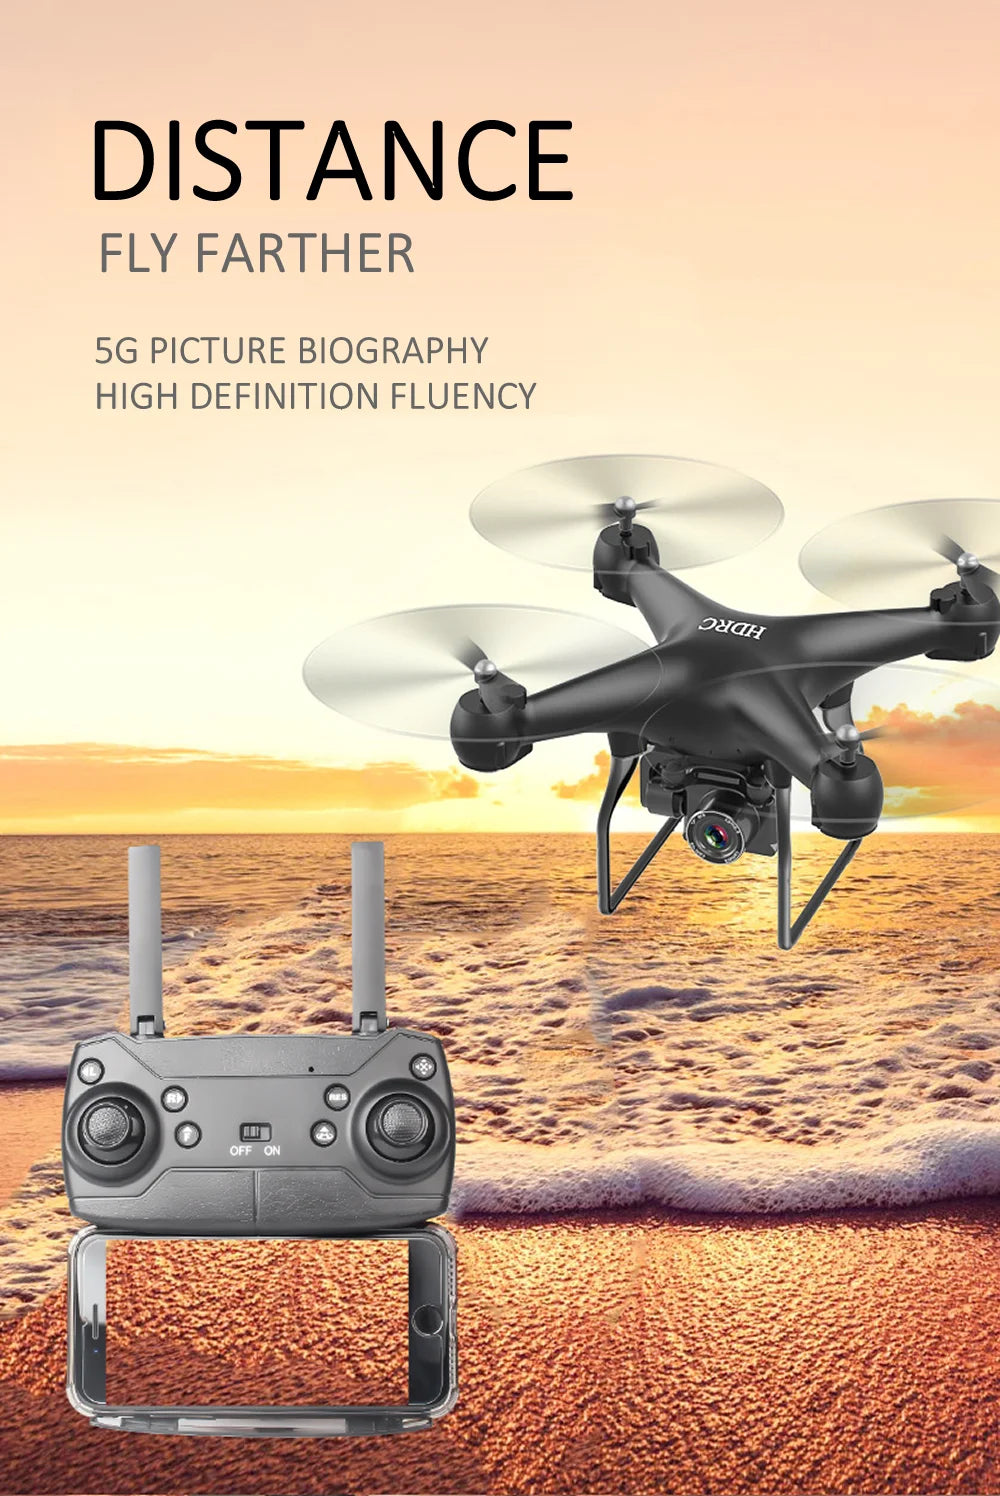 RC Drone, distance fly farther 5g picture biography high definition fluency off d